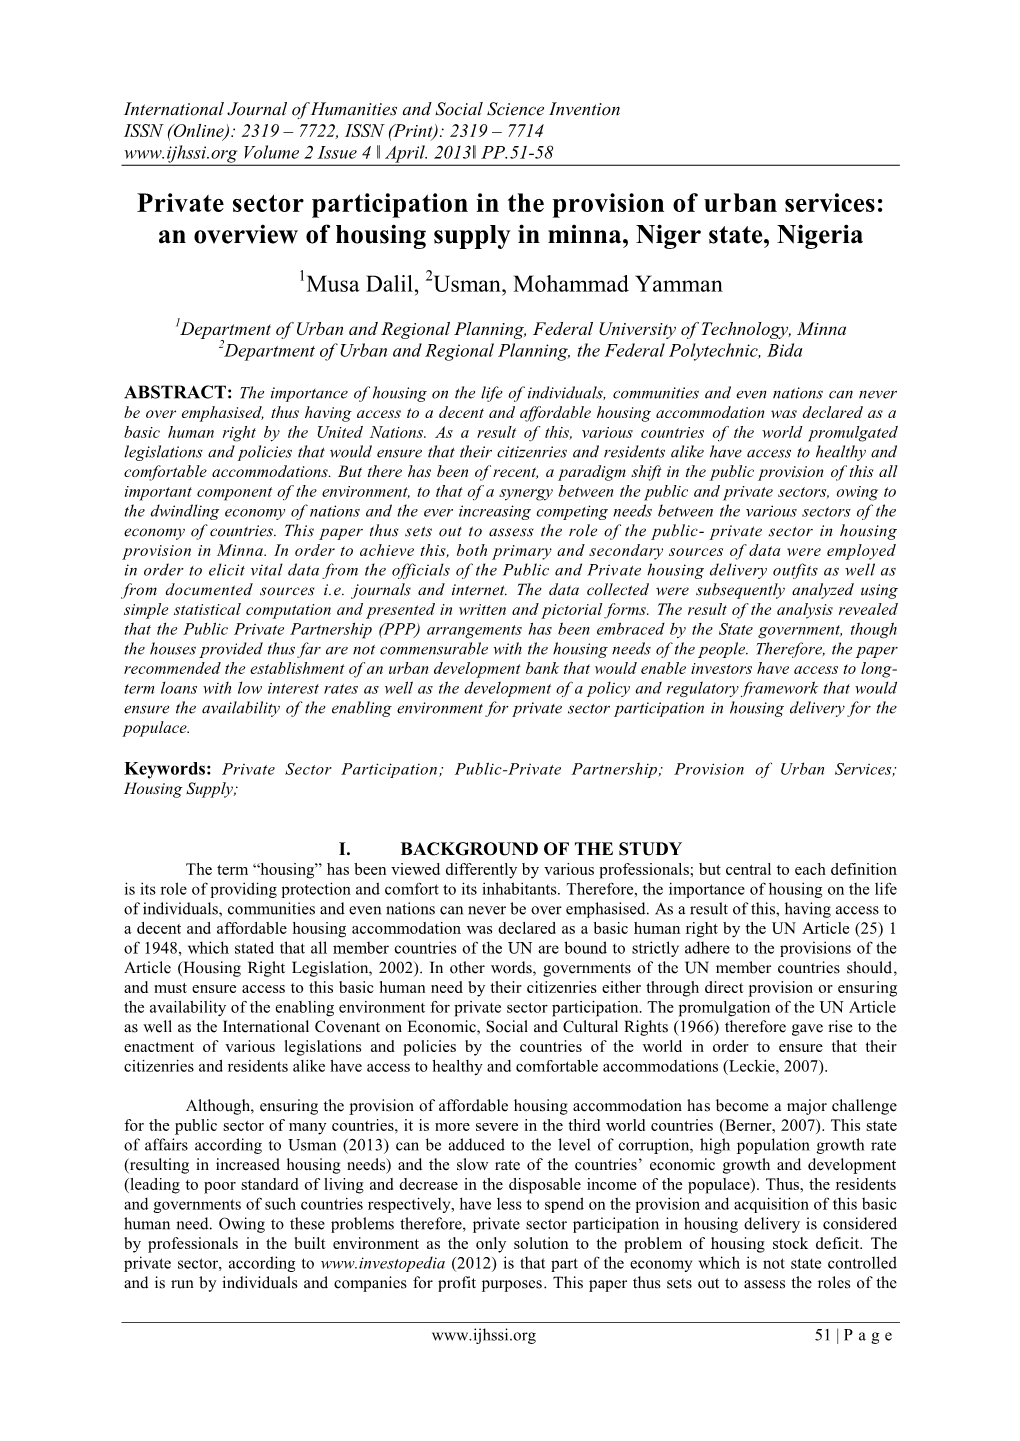 An Overview of Housing Supply in Minna, Niger State, Nigeria 1Musa Dalil, 2Usman, Mohammad Yamman